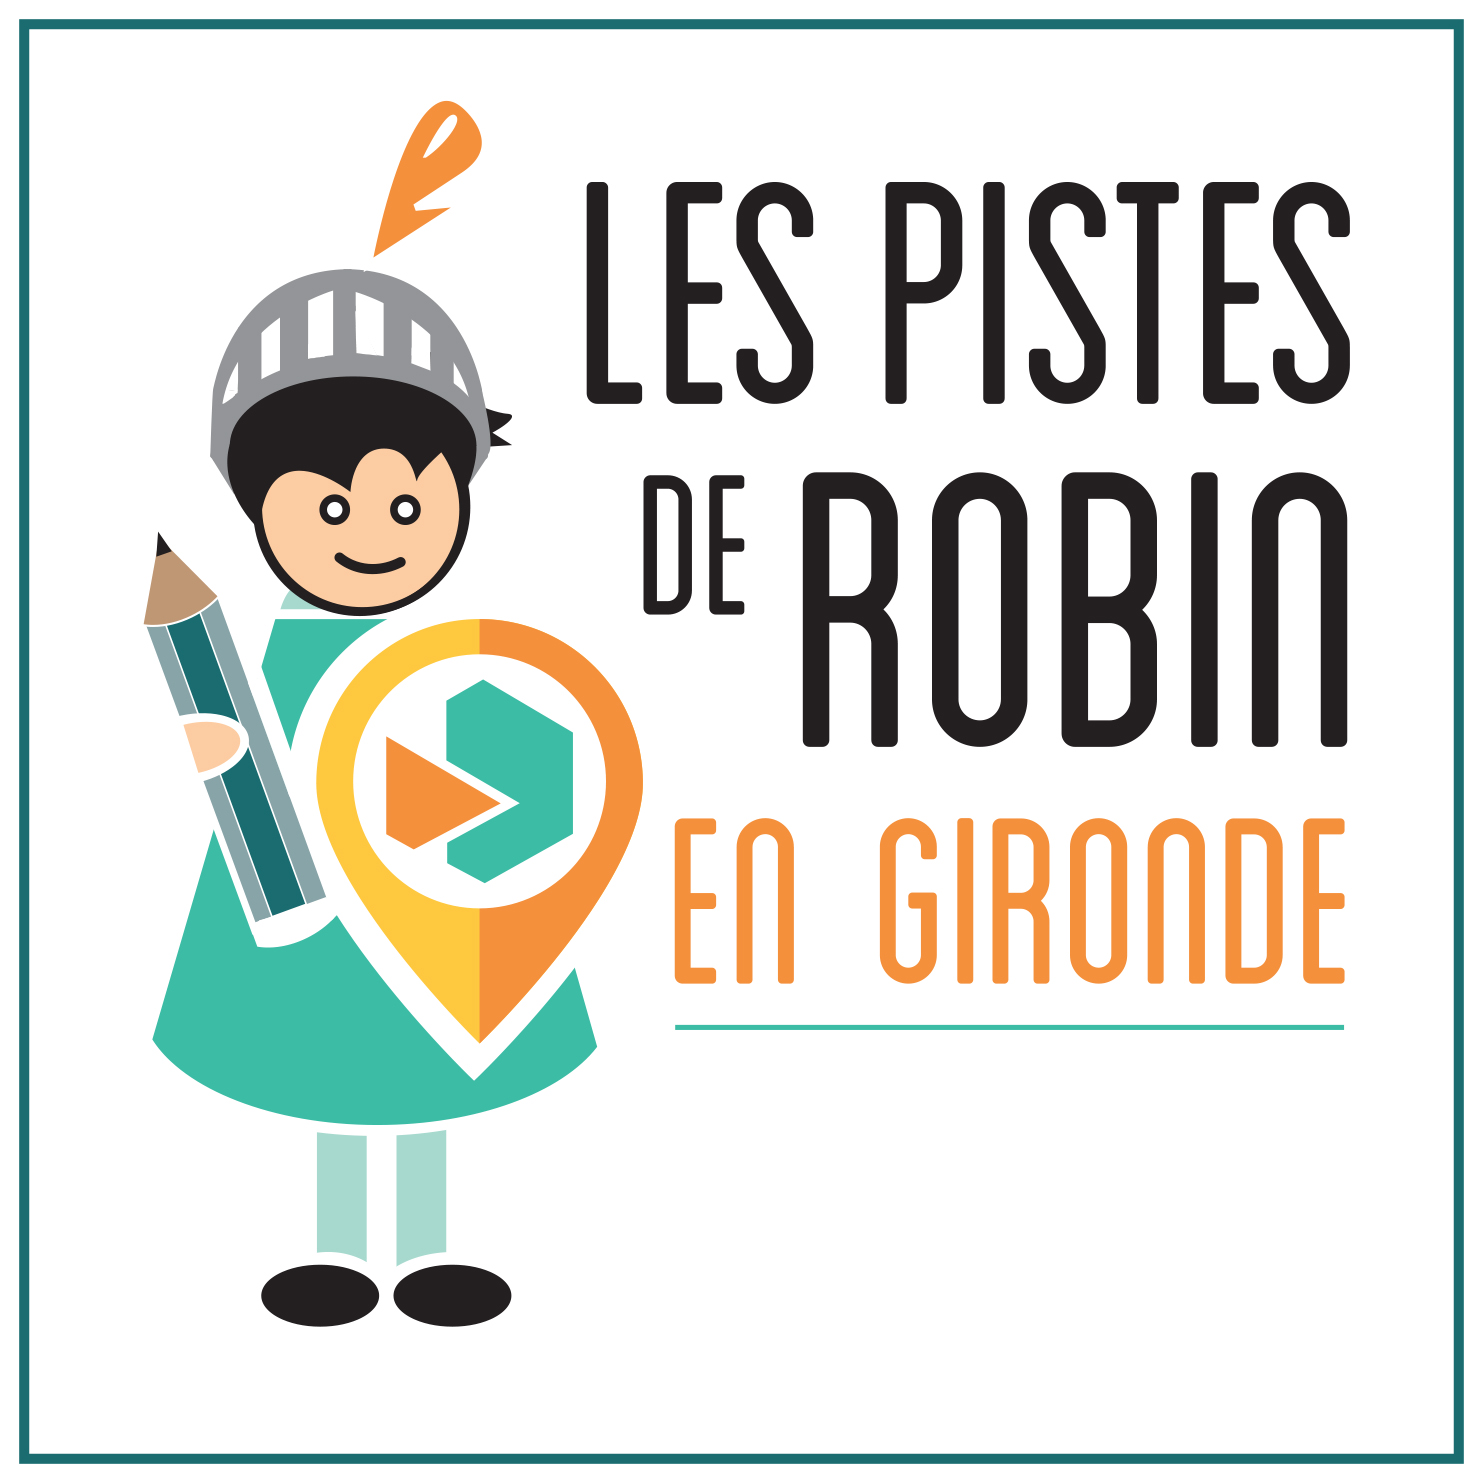 On the trails of Robin in Saint-Seurin-sur-L'Isle